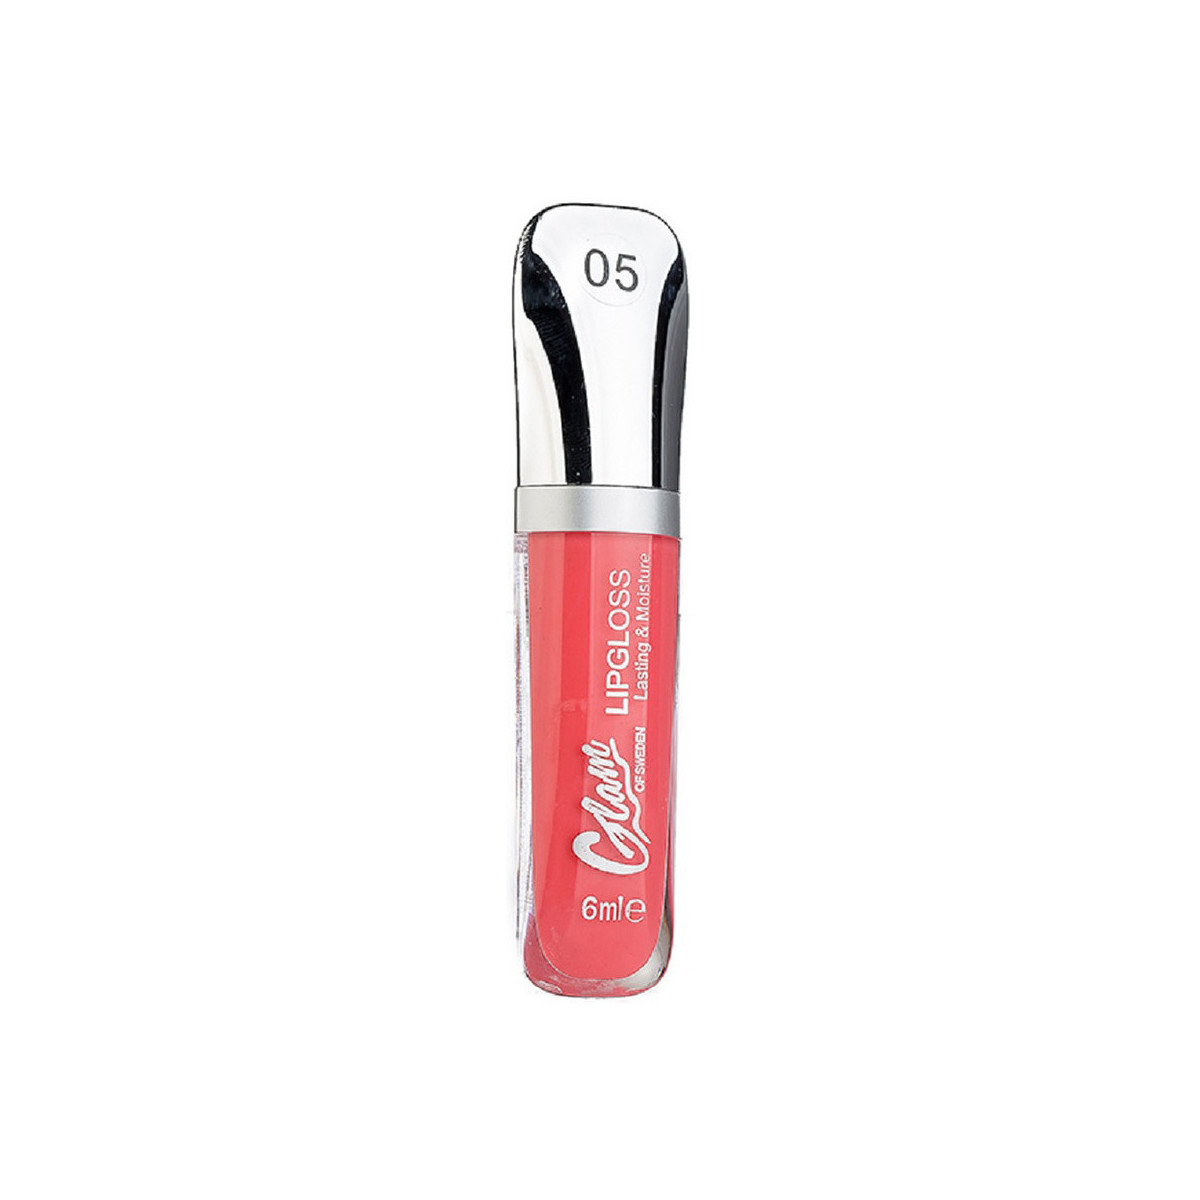 Bellezza Donna Gloss Glam Of Sweden Glossy Shine Lipgloss 05-coral 